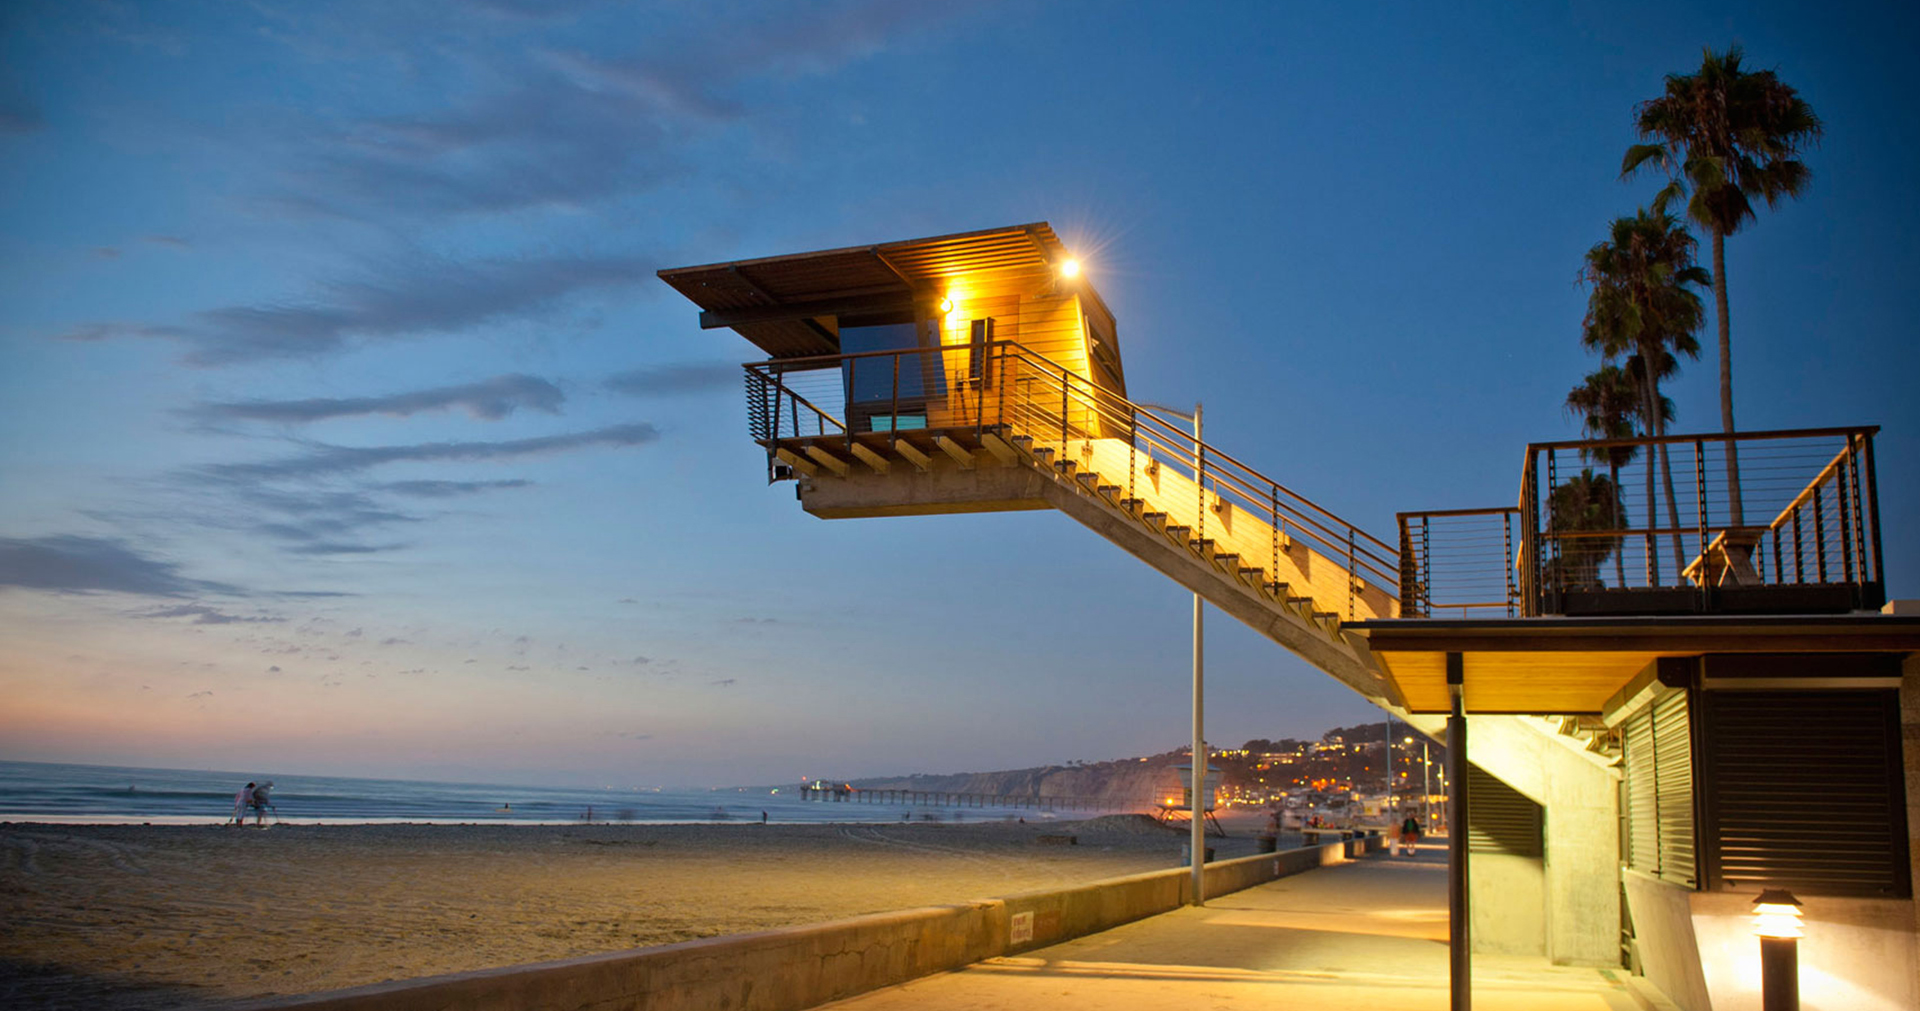 These 5 Lifeguard Towers Are Works of Art | InsideHook